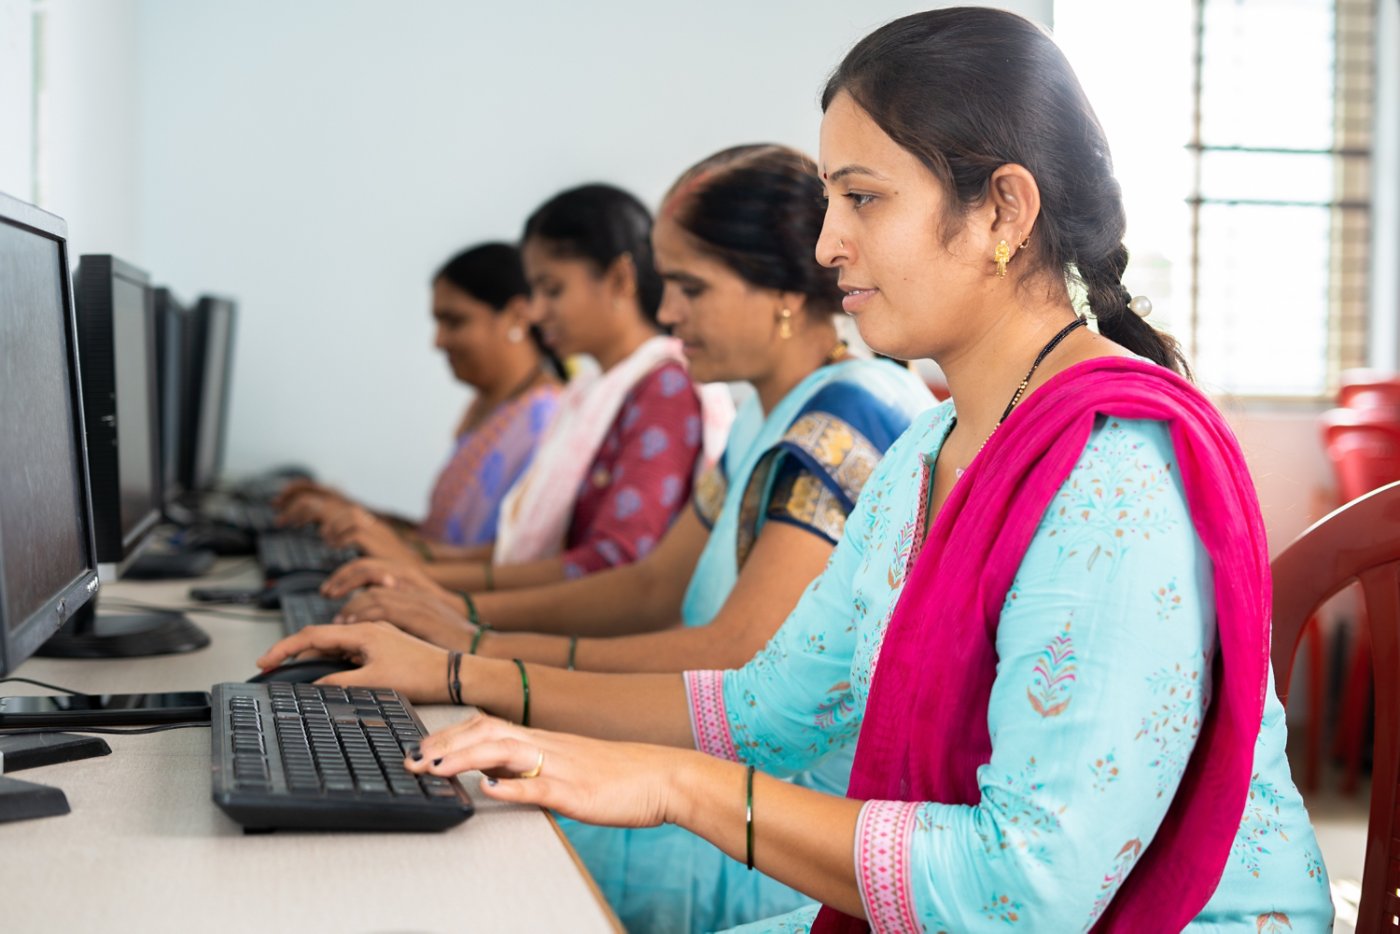 group of women busy learning or working on computer at training center - concept of empowerment, learning and education.